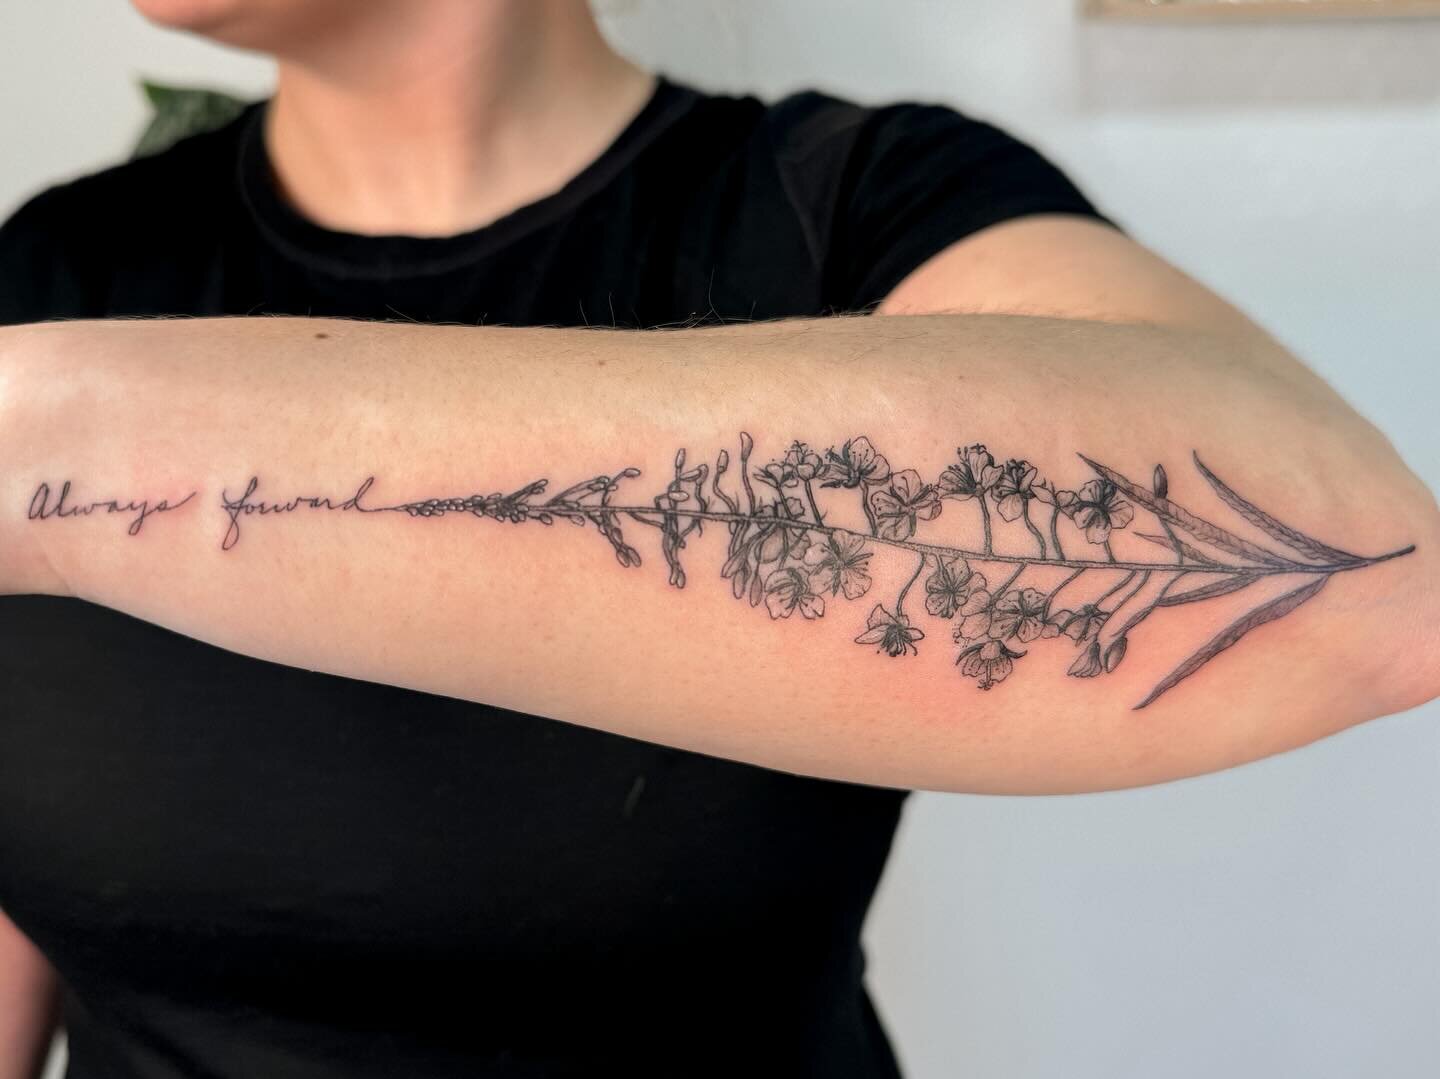 ✨ Always forward ✨ gimme allllll the botanicals this week 🥵 loving this fireweed and her aunt&rsquo;s words of wisdom 💕

🌙 May-June books now open! Link to book in bio ✨

#seattletattoo #northbendtattoo #snoqualmievalley #tattoosofinstagram #inked